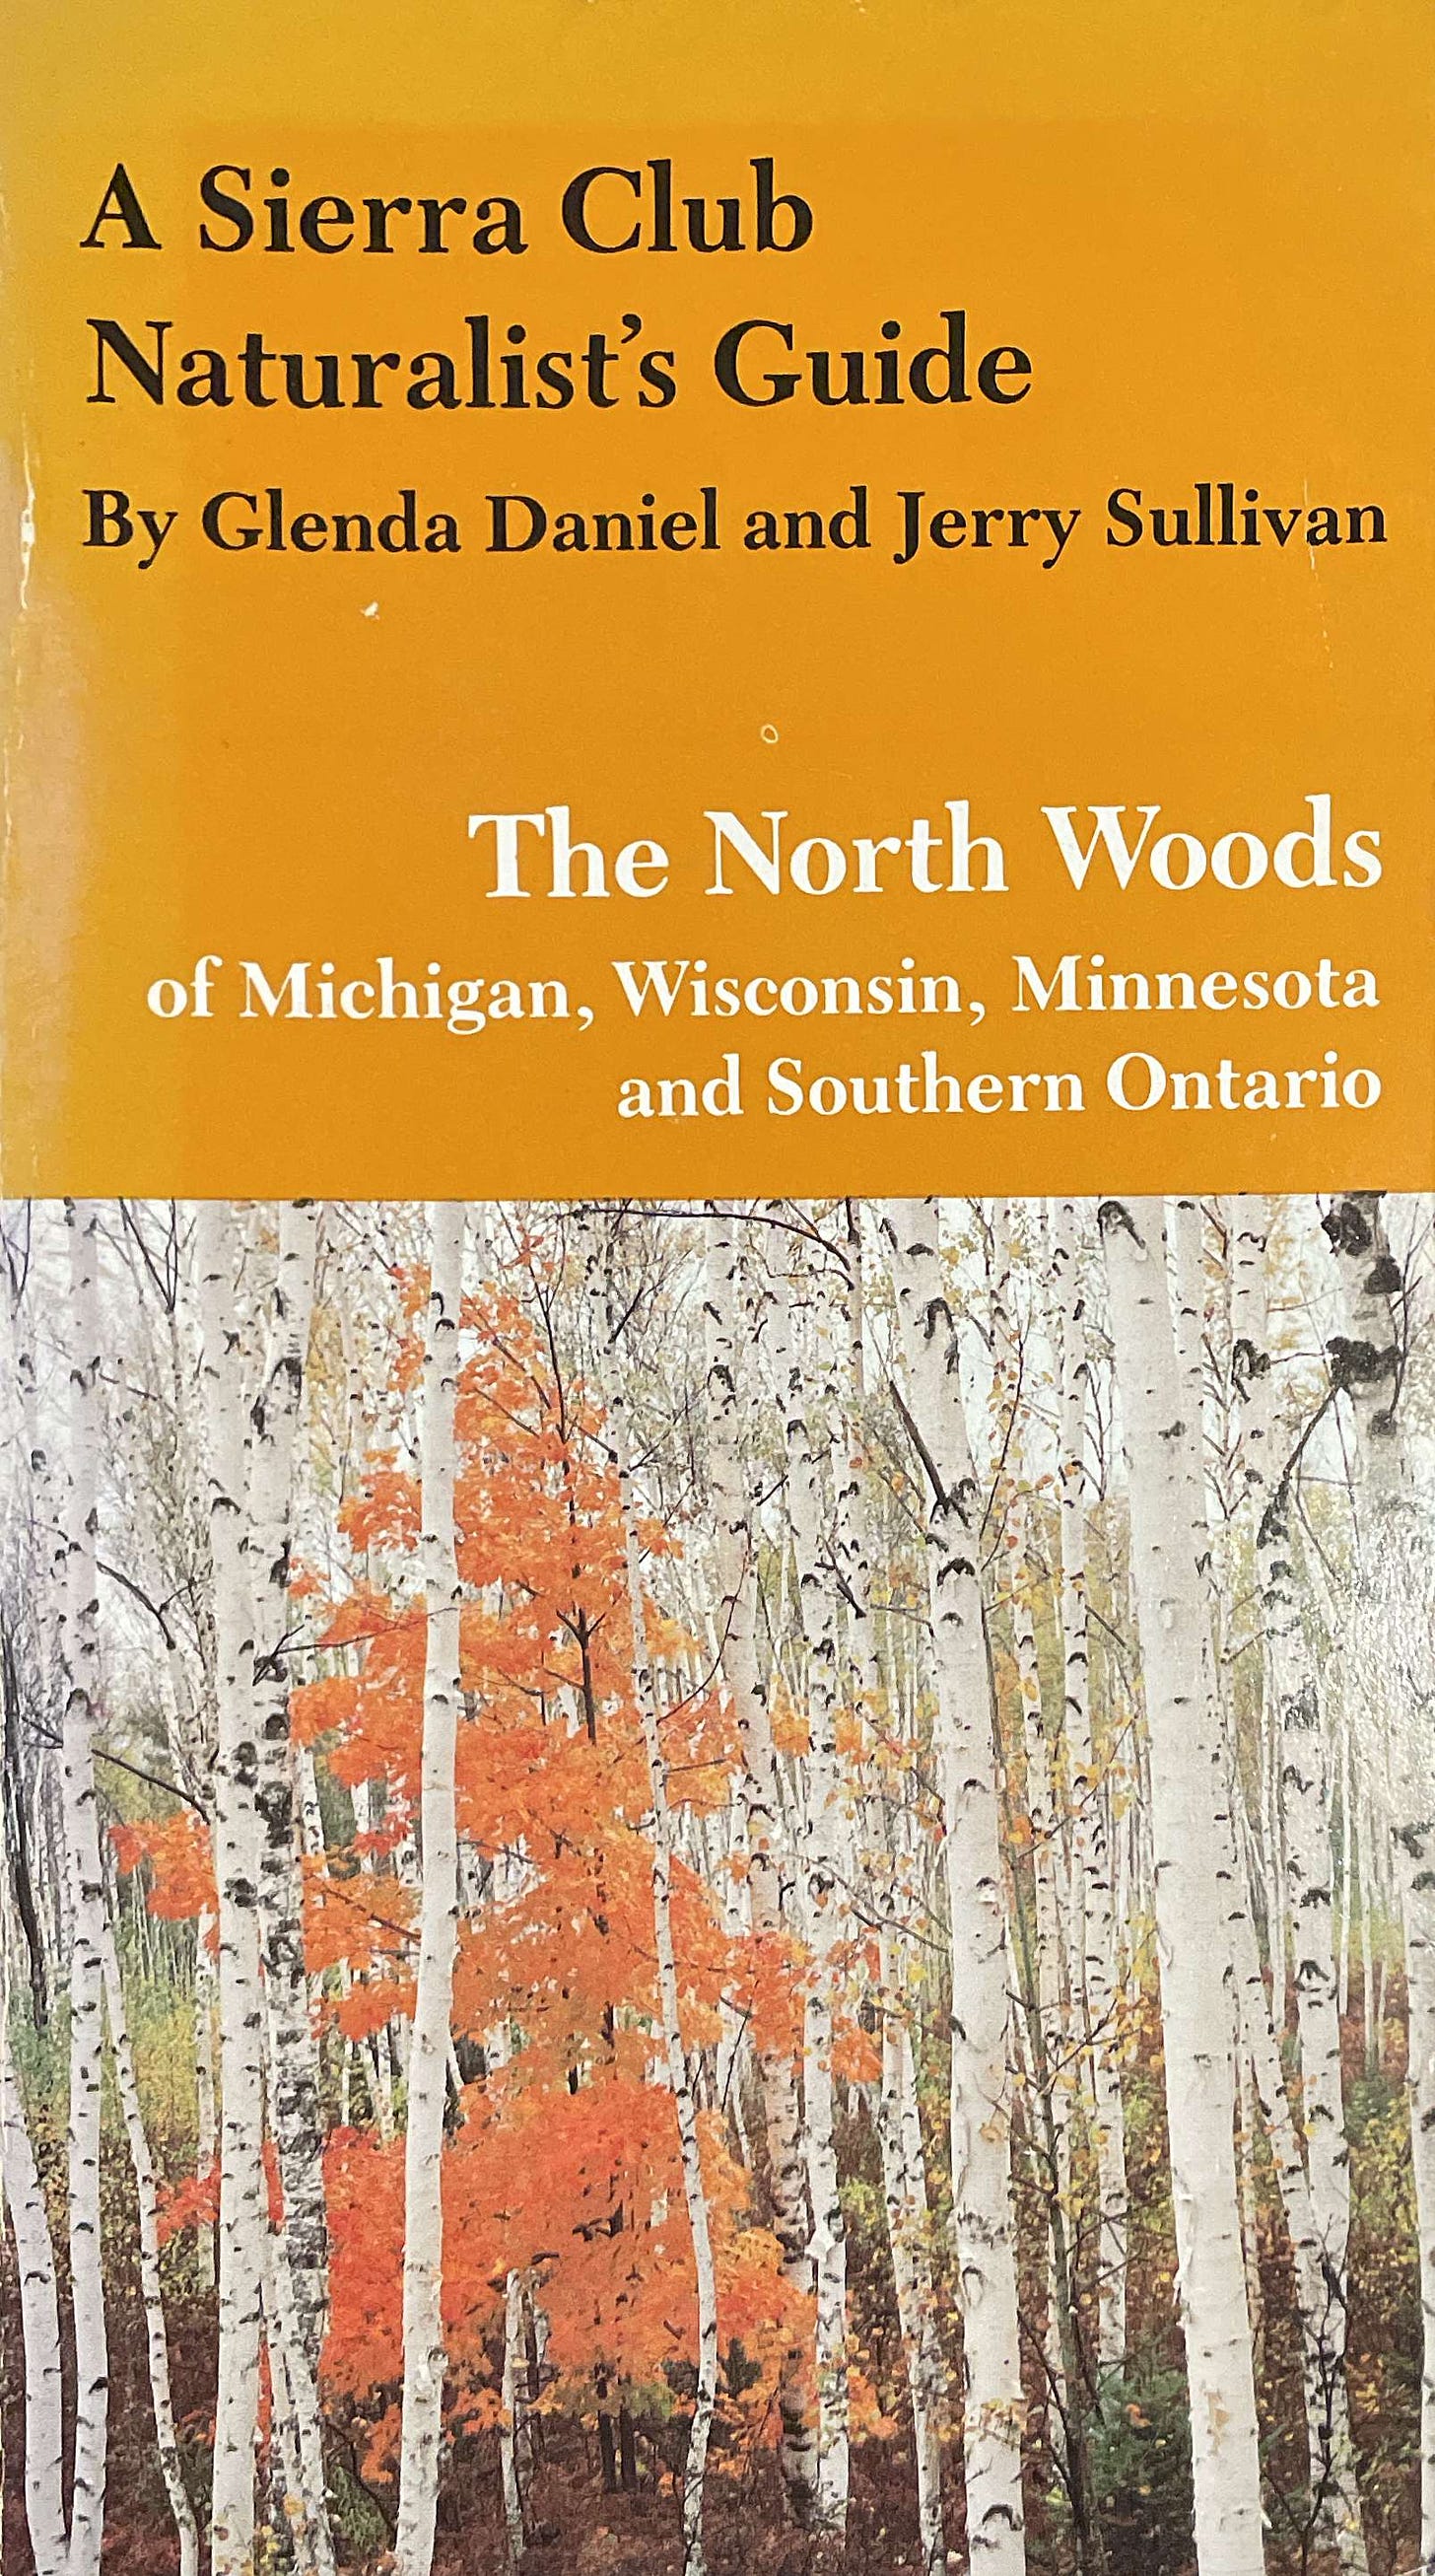 A book cover of the "The NOrth Woods of Michigan, Wisconsin,  Minnesota, and Southern Ontario